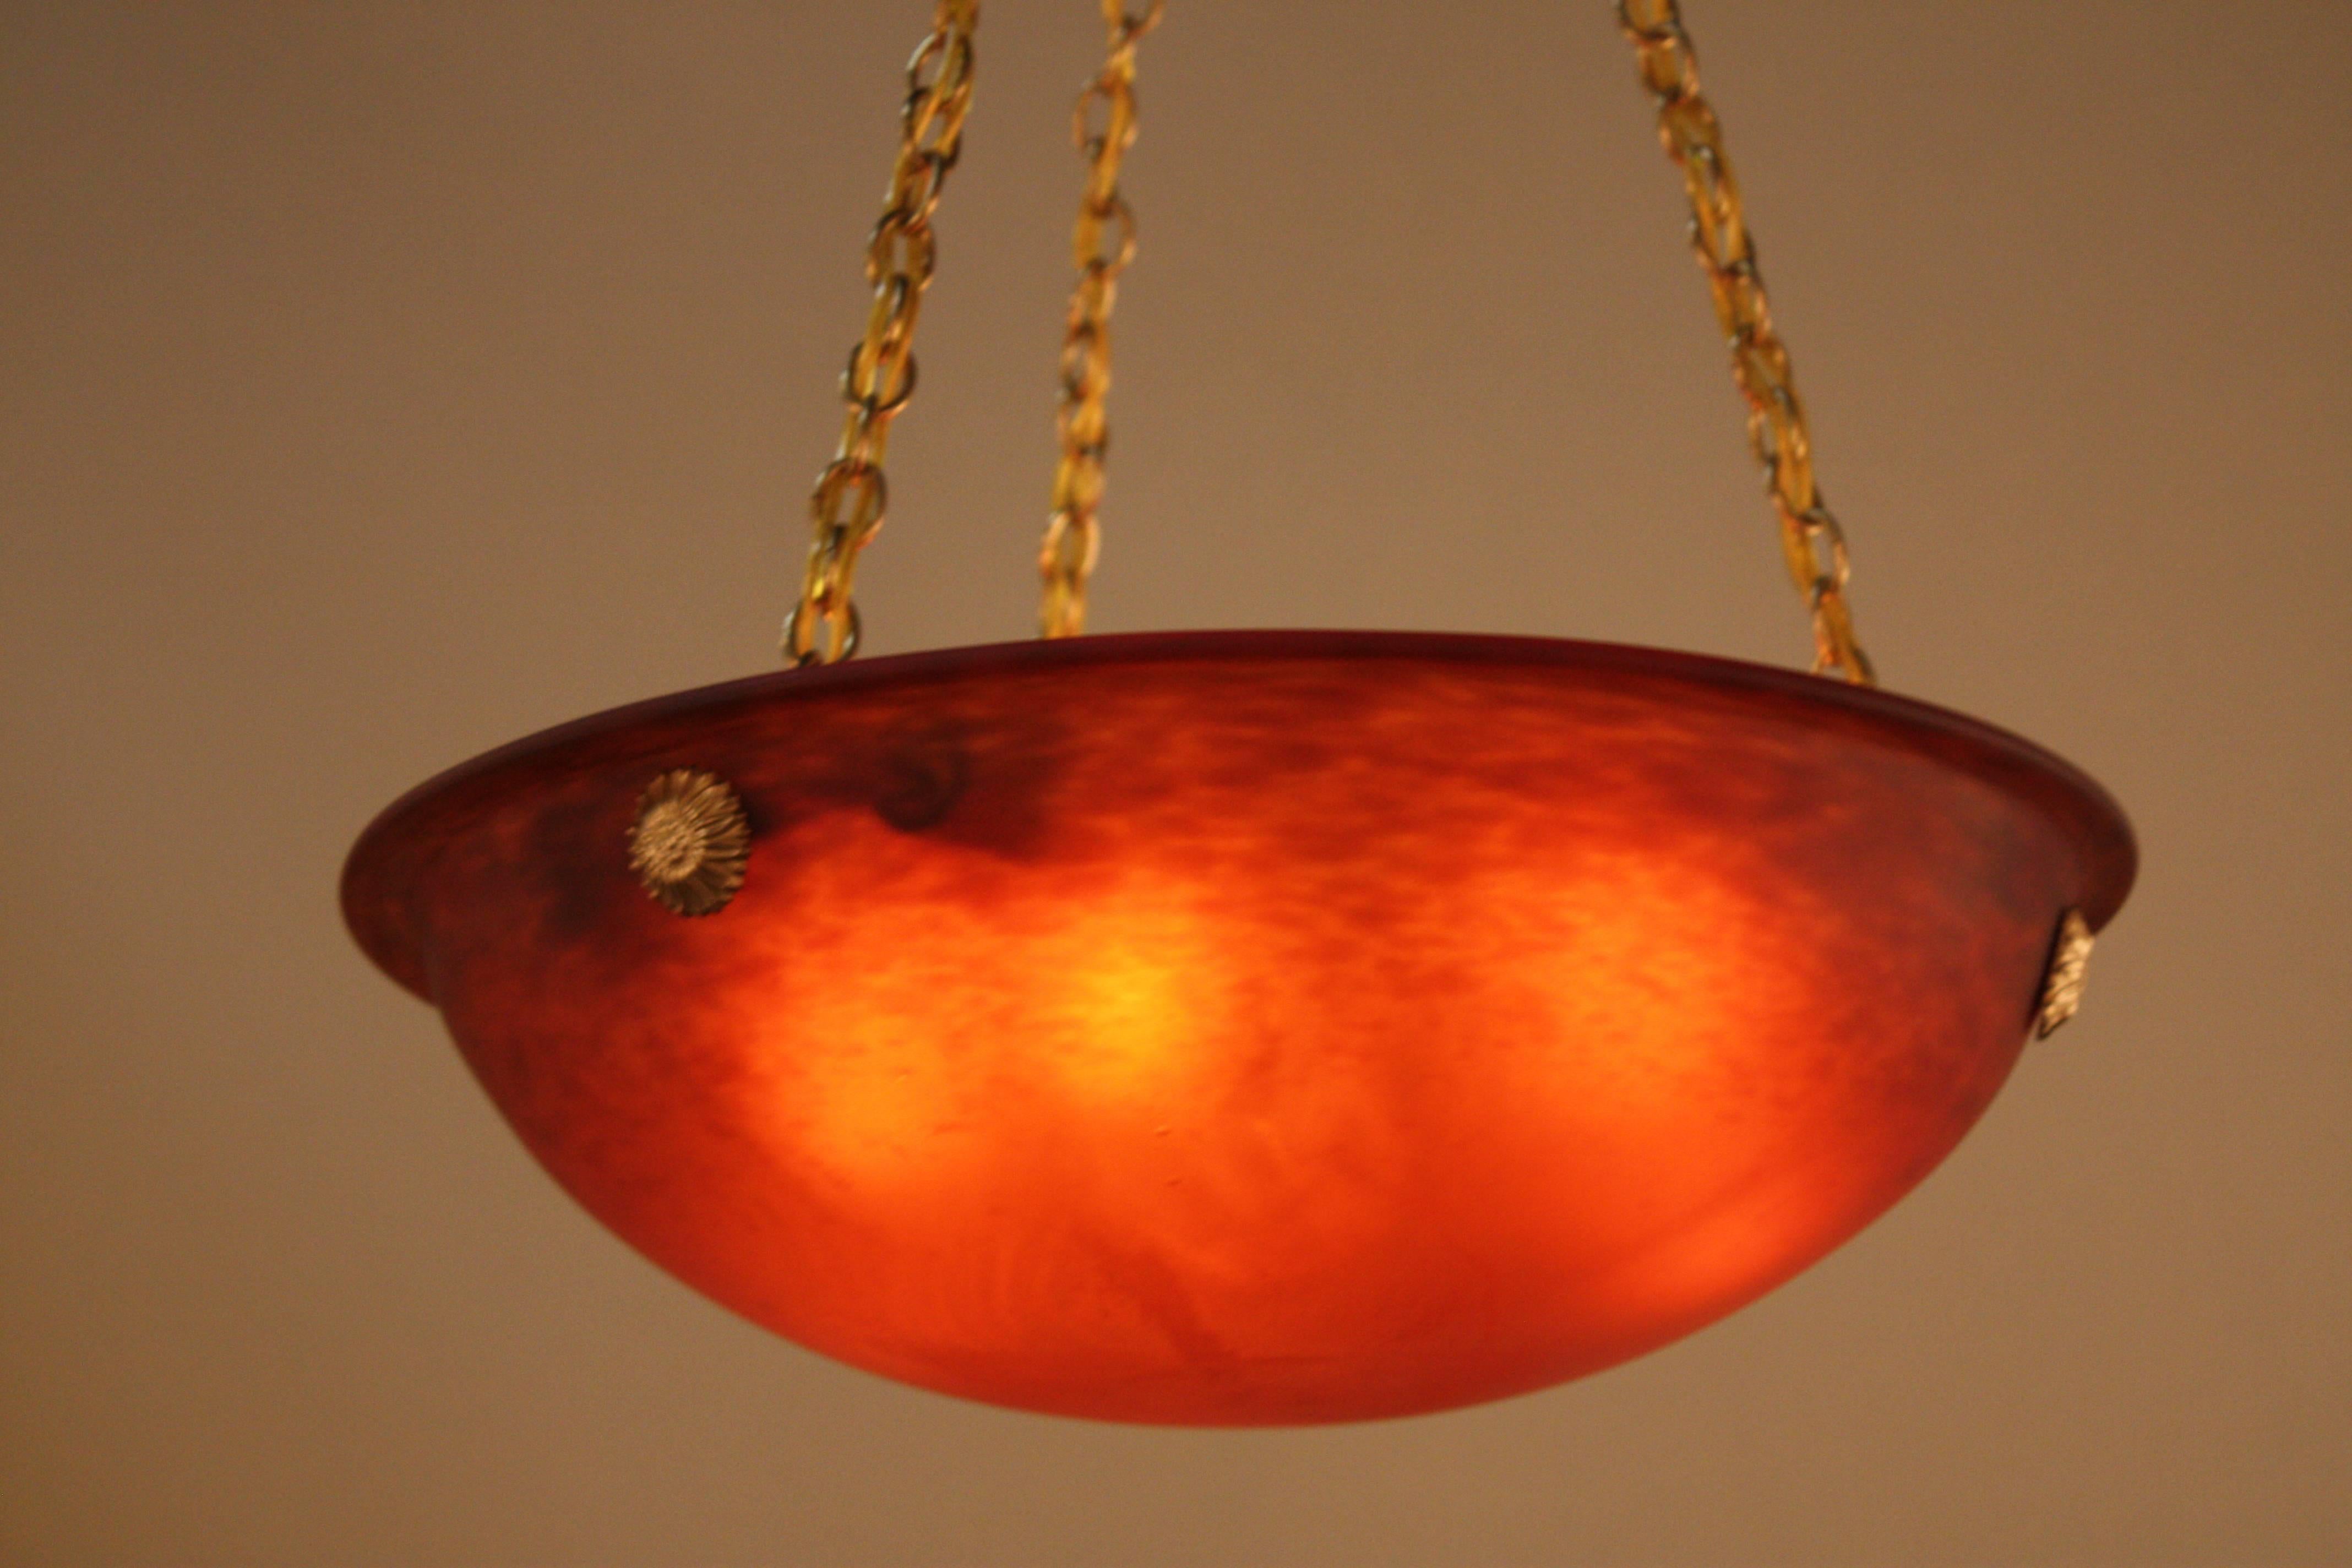 Handblown glass chandelier in beautiful textured red and bronze hardware.
Six lights, 60watts each.
Height can be adjusted by removing some of the chain.